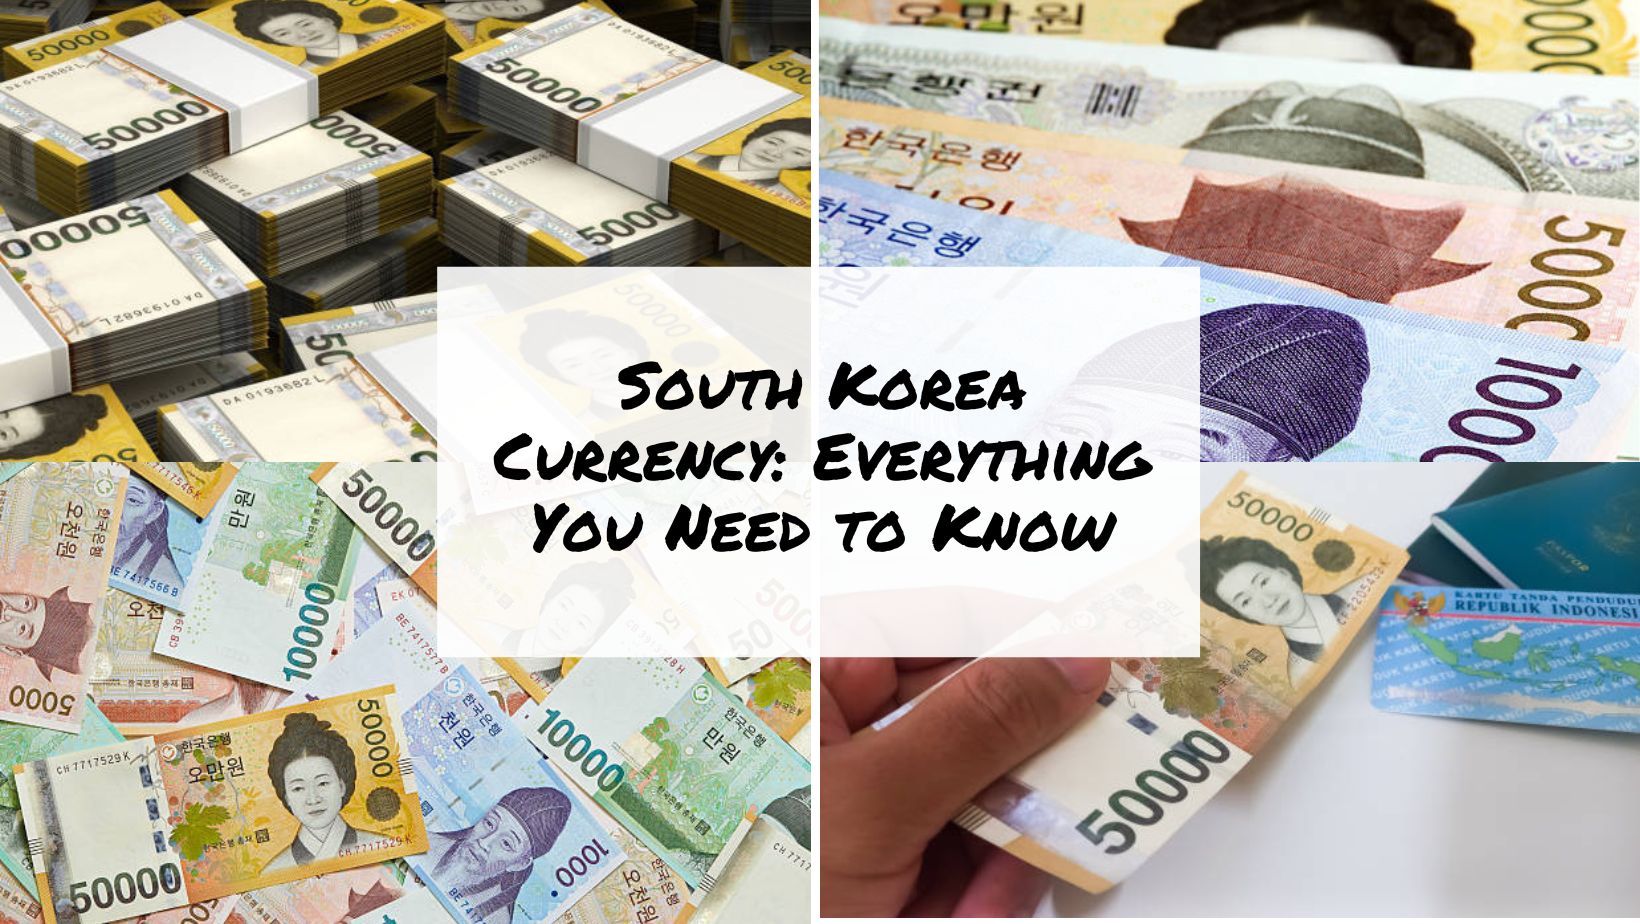 South Korea Currency Everything You Need to Know